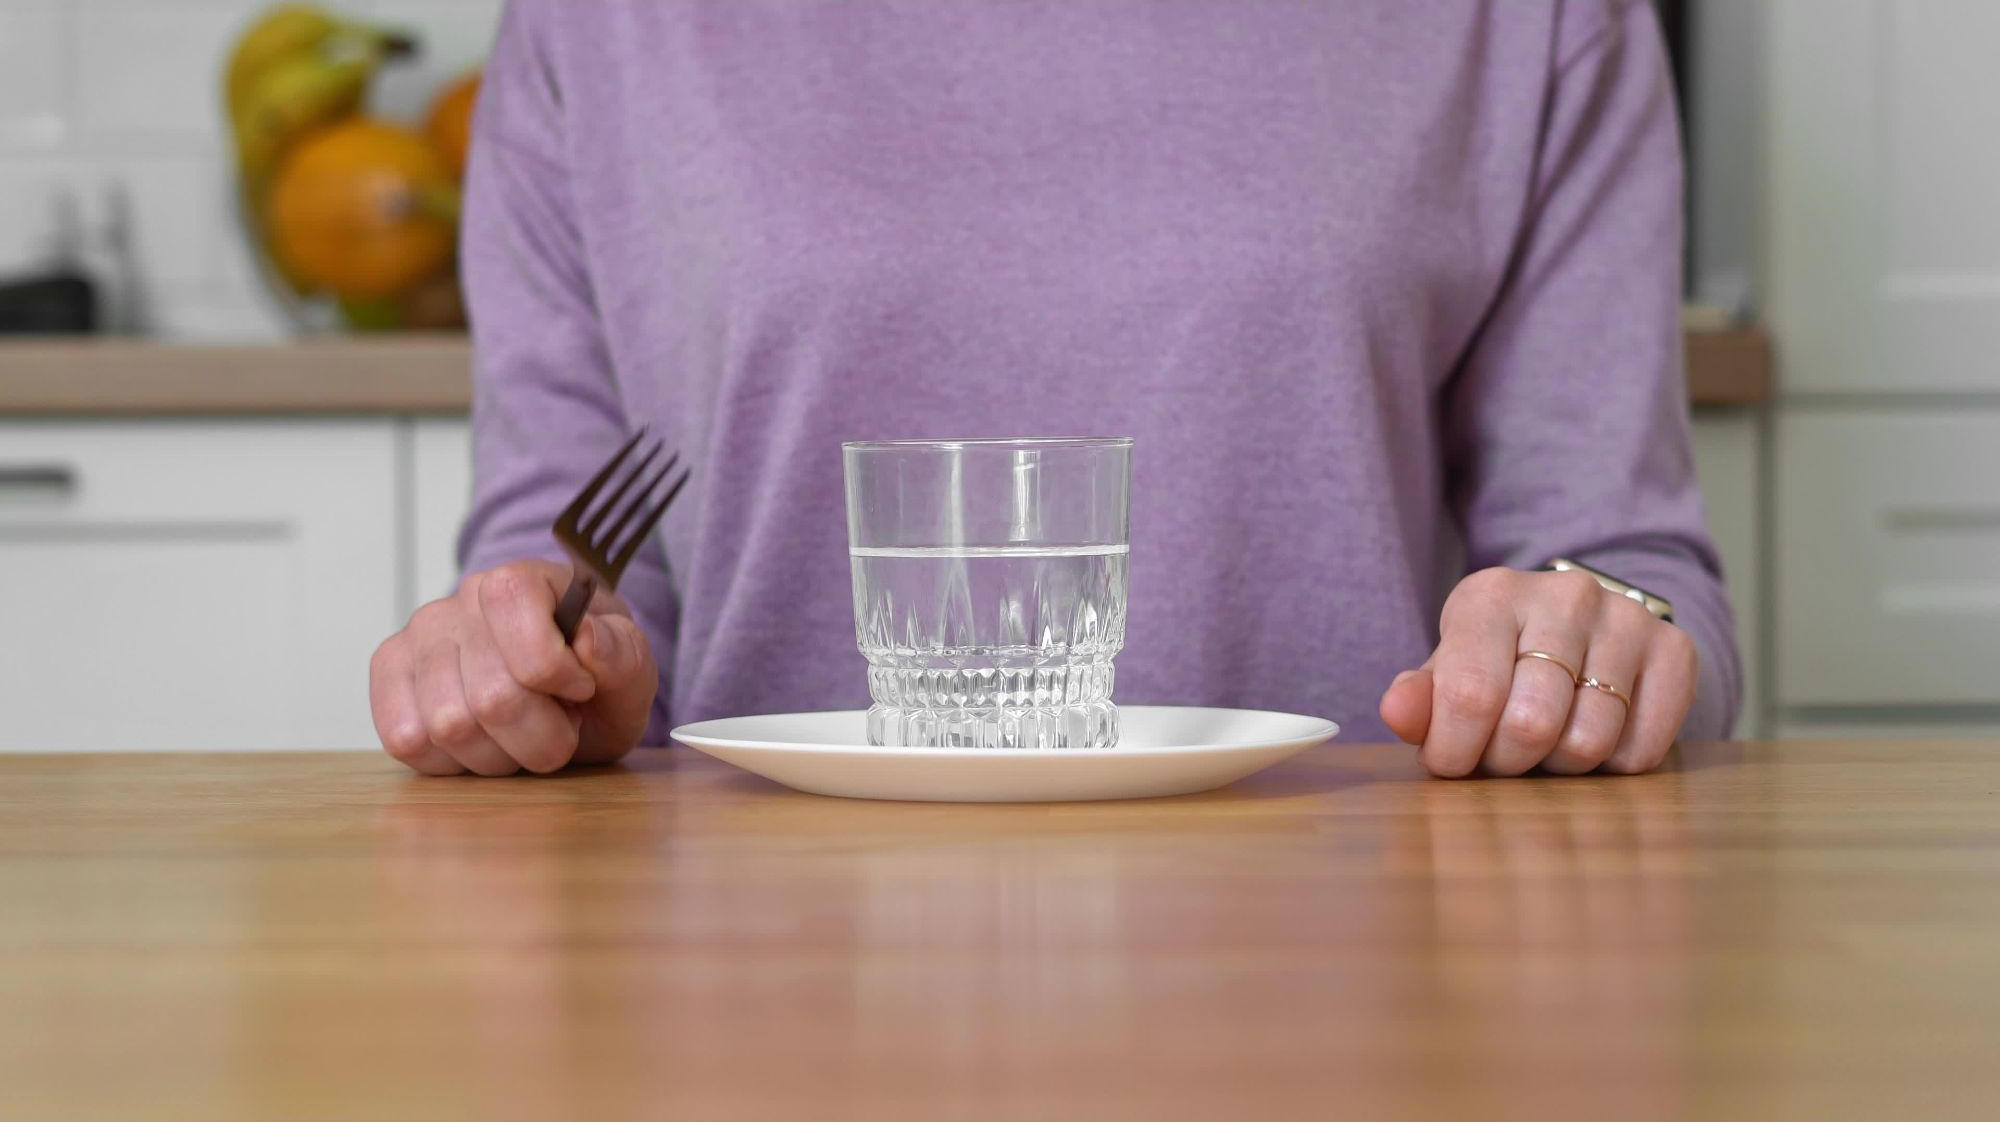 The truth about fasting: Does the 72-hour water fast really work? We tried  it and the results were surprising - CityAM